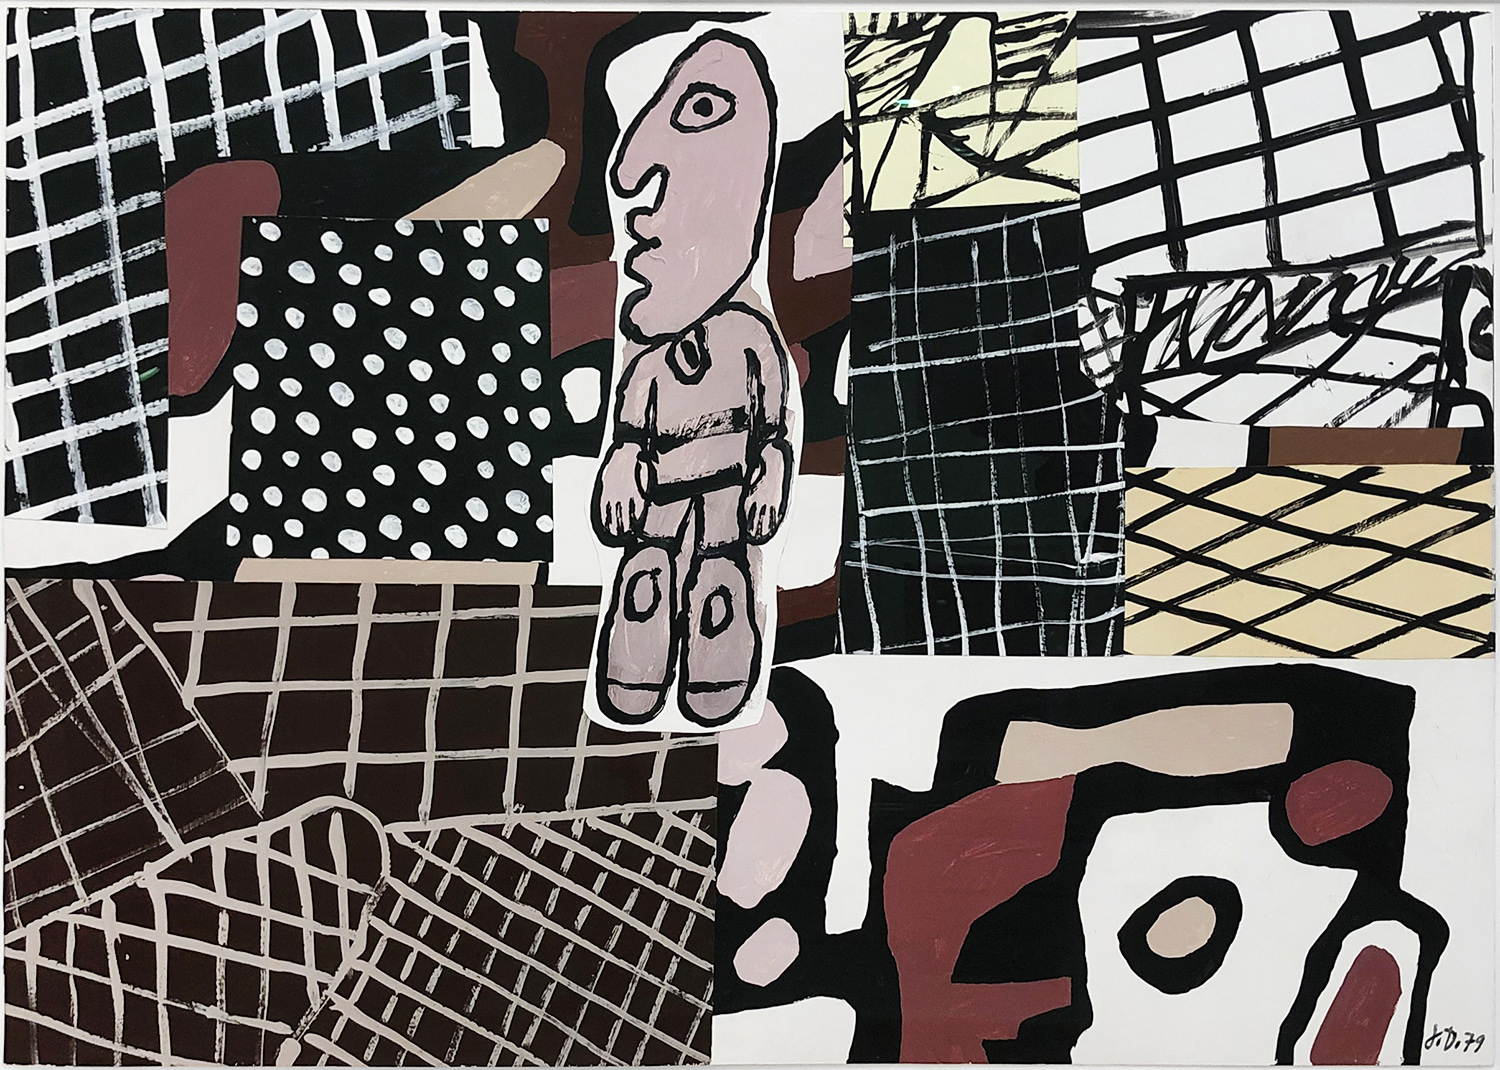 Jean Dubuffet collage with man in center and pink, brown tones